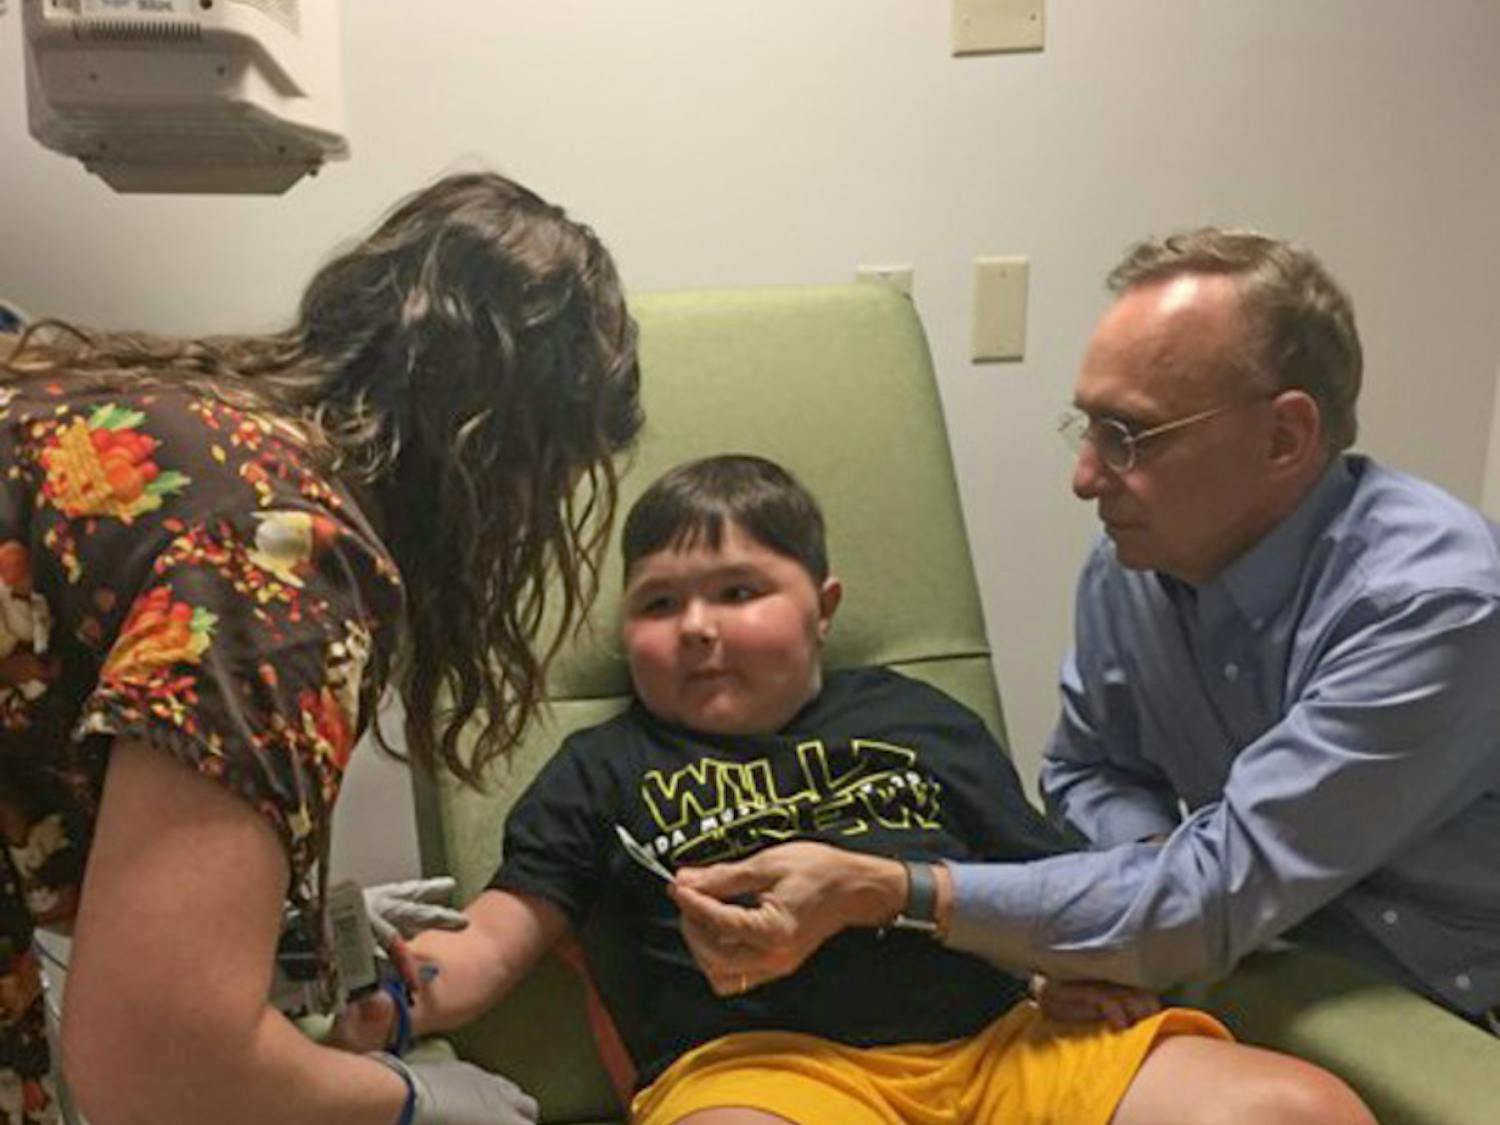 A UF Health Shands Hospital nurse tends to 9-year-old Will Barkoskie’s IV while Dr. Barry Byrne, a UF College of Medicine professor, looks on. Diagnosed with Duchenne muscular dystrophy, Barkoskie is receiving groundbreaking treatment at Shands.